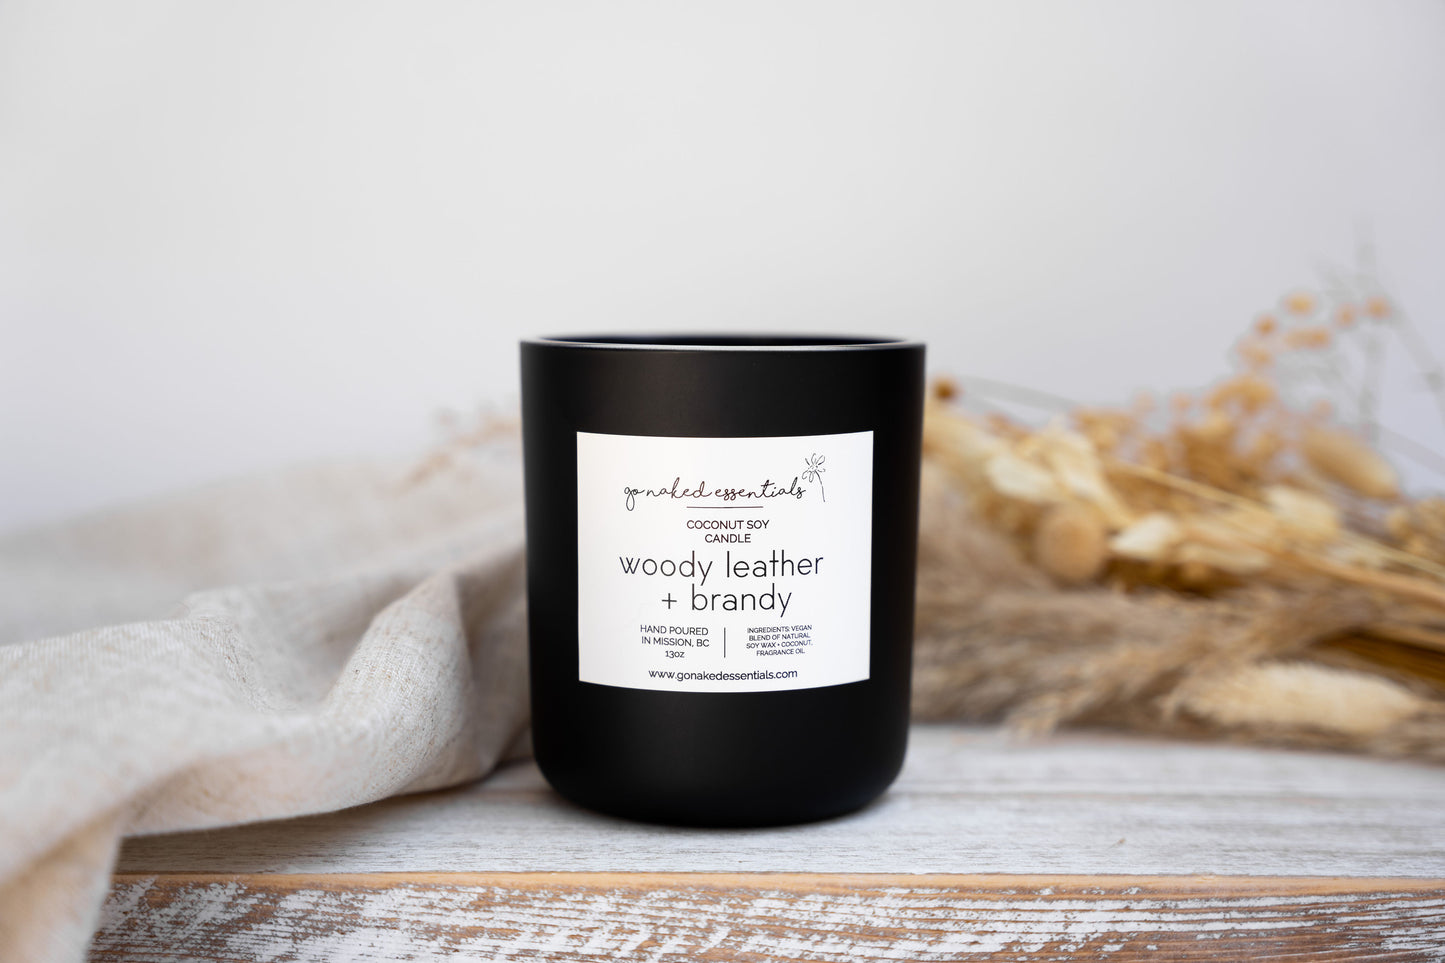 Woody Leather + Brandy Coconut Soy Candle